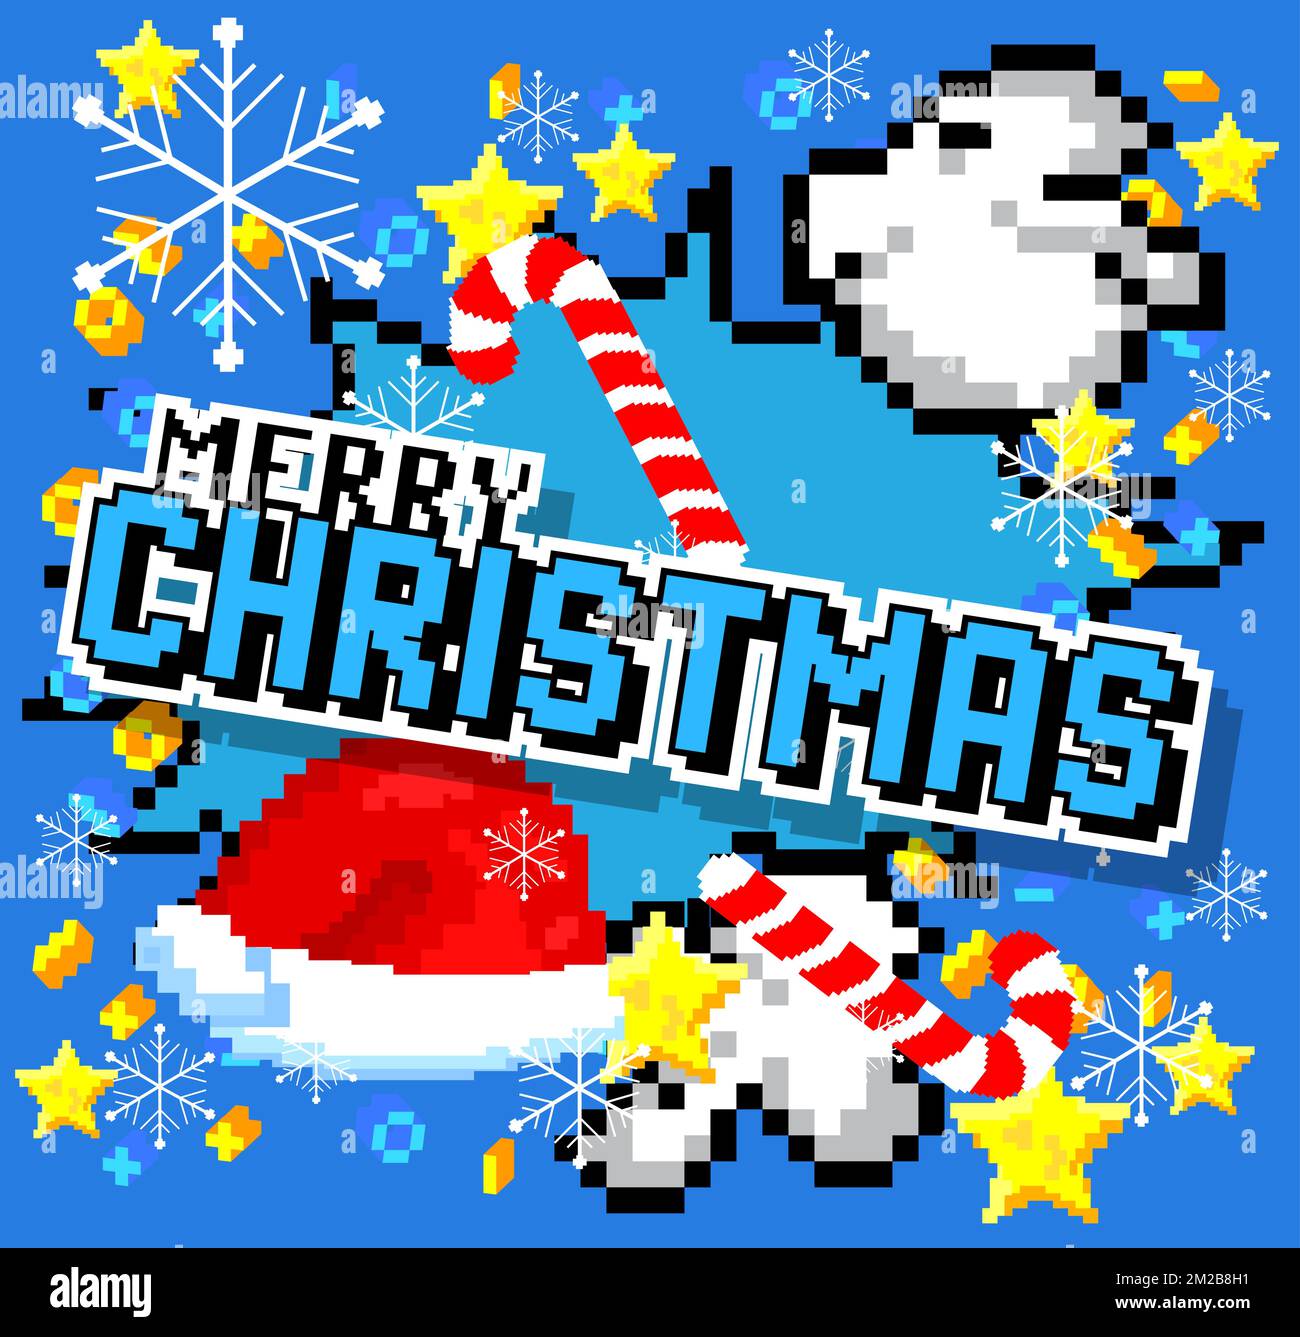 Merry Christmas. Pixelated word with geometric graphic background. Vector cartoon illustration. Stock Vector